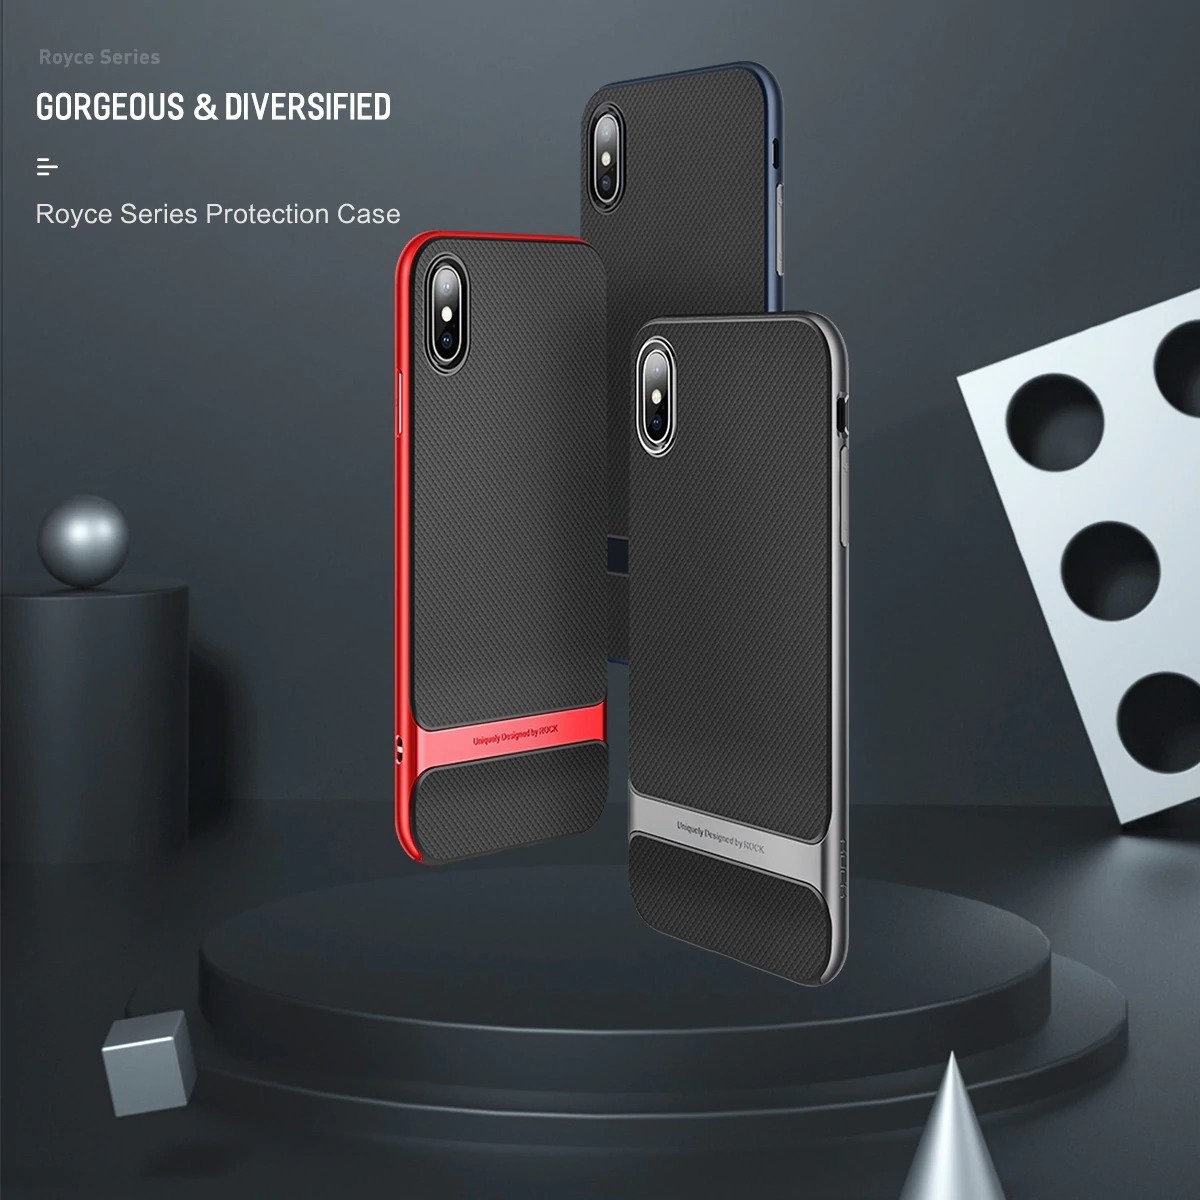 New Rock Royce Luxury case for iPhone X and iPhone Xs with 3D Glass Protector